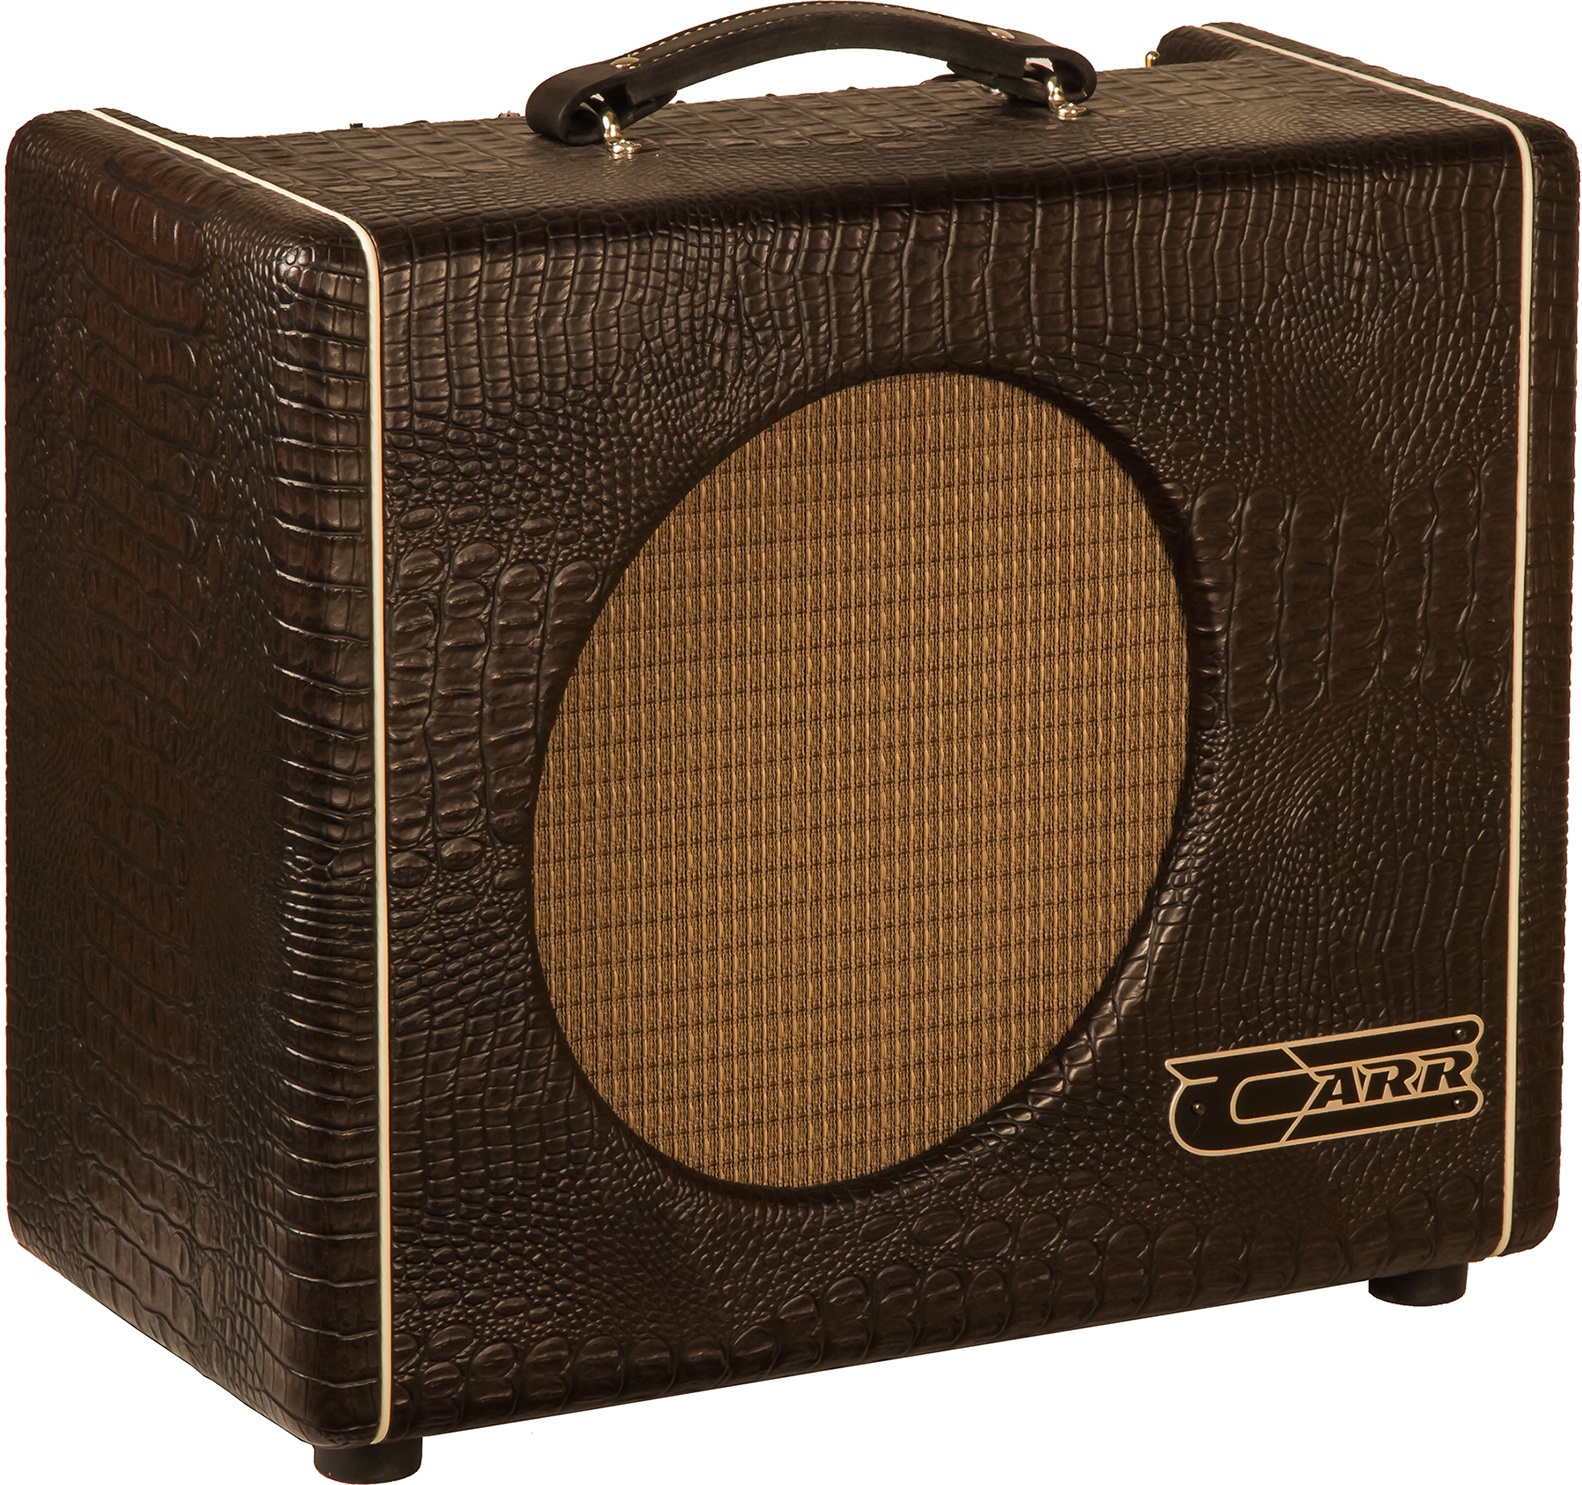 Carr Amplifiers Mercury V 1-12 Combo 16w 1x12 6v6 Brown Gator - Electric guitar combo amp - Main picture